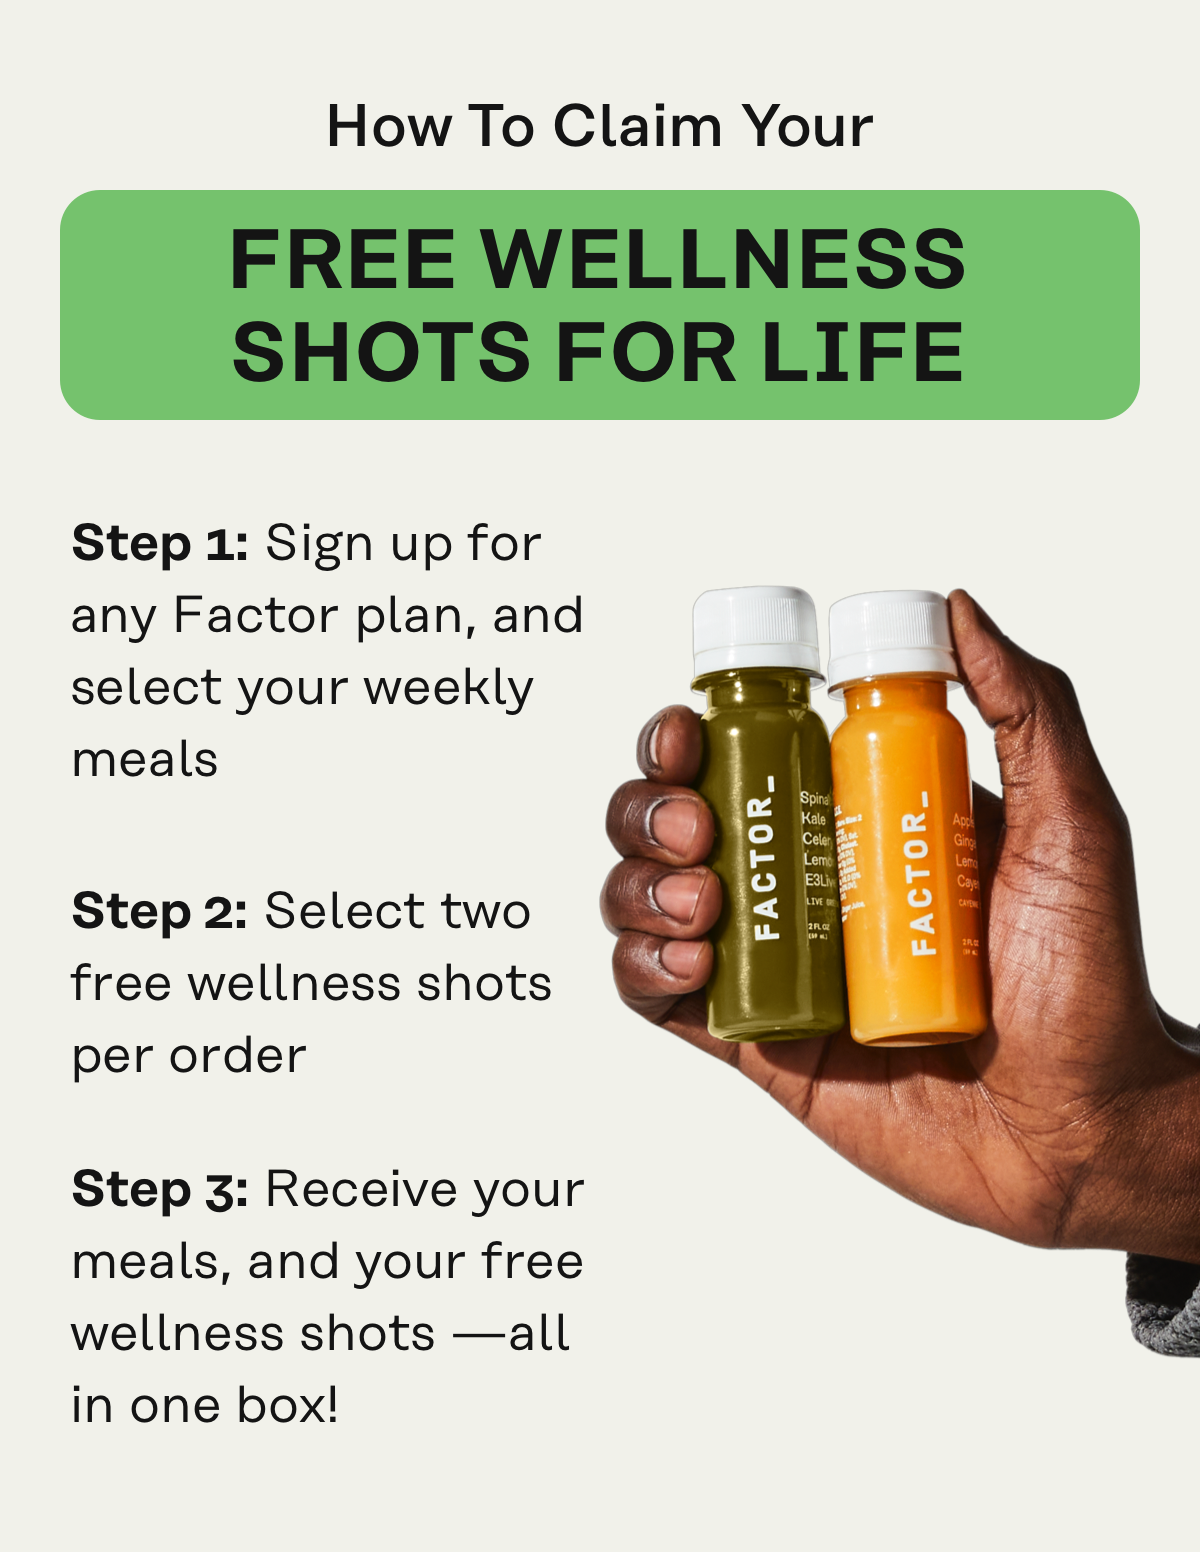 How to Claim Your Free Wellness Shots for Life: 1. Sign up for any Factor plan, and select your weekly meals 2. Select two free wellness shots per order and have discount automatically apply at checkout 3. Recieve your meals, and your free wellness shots all in one box!